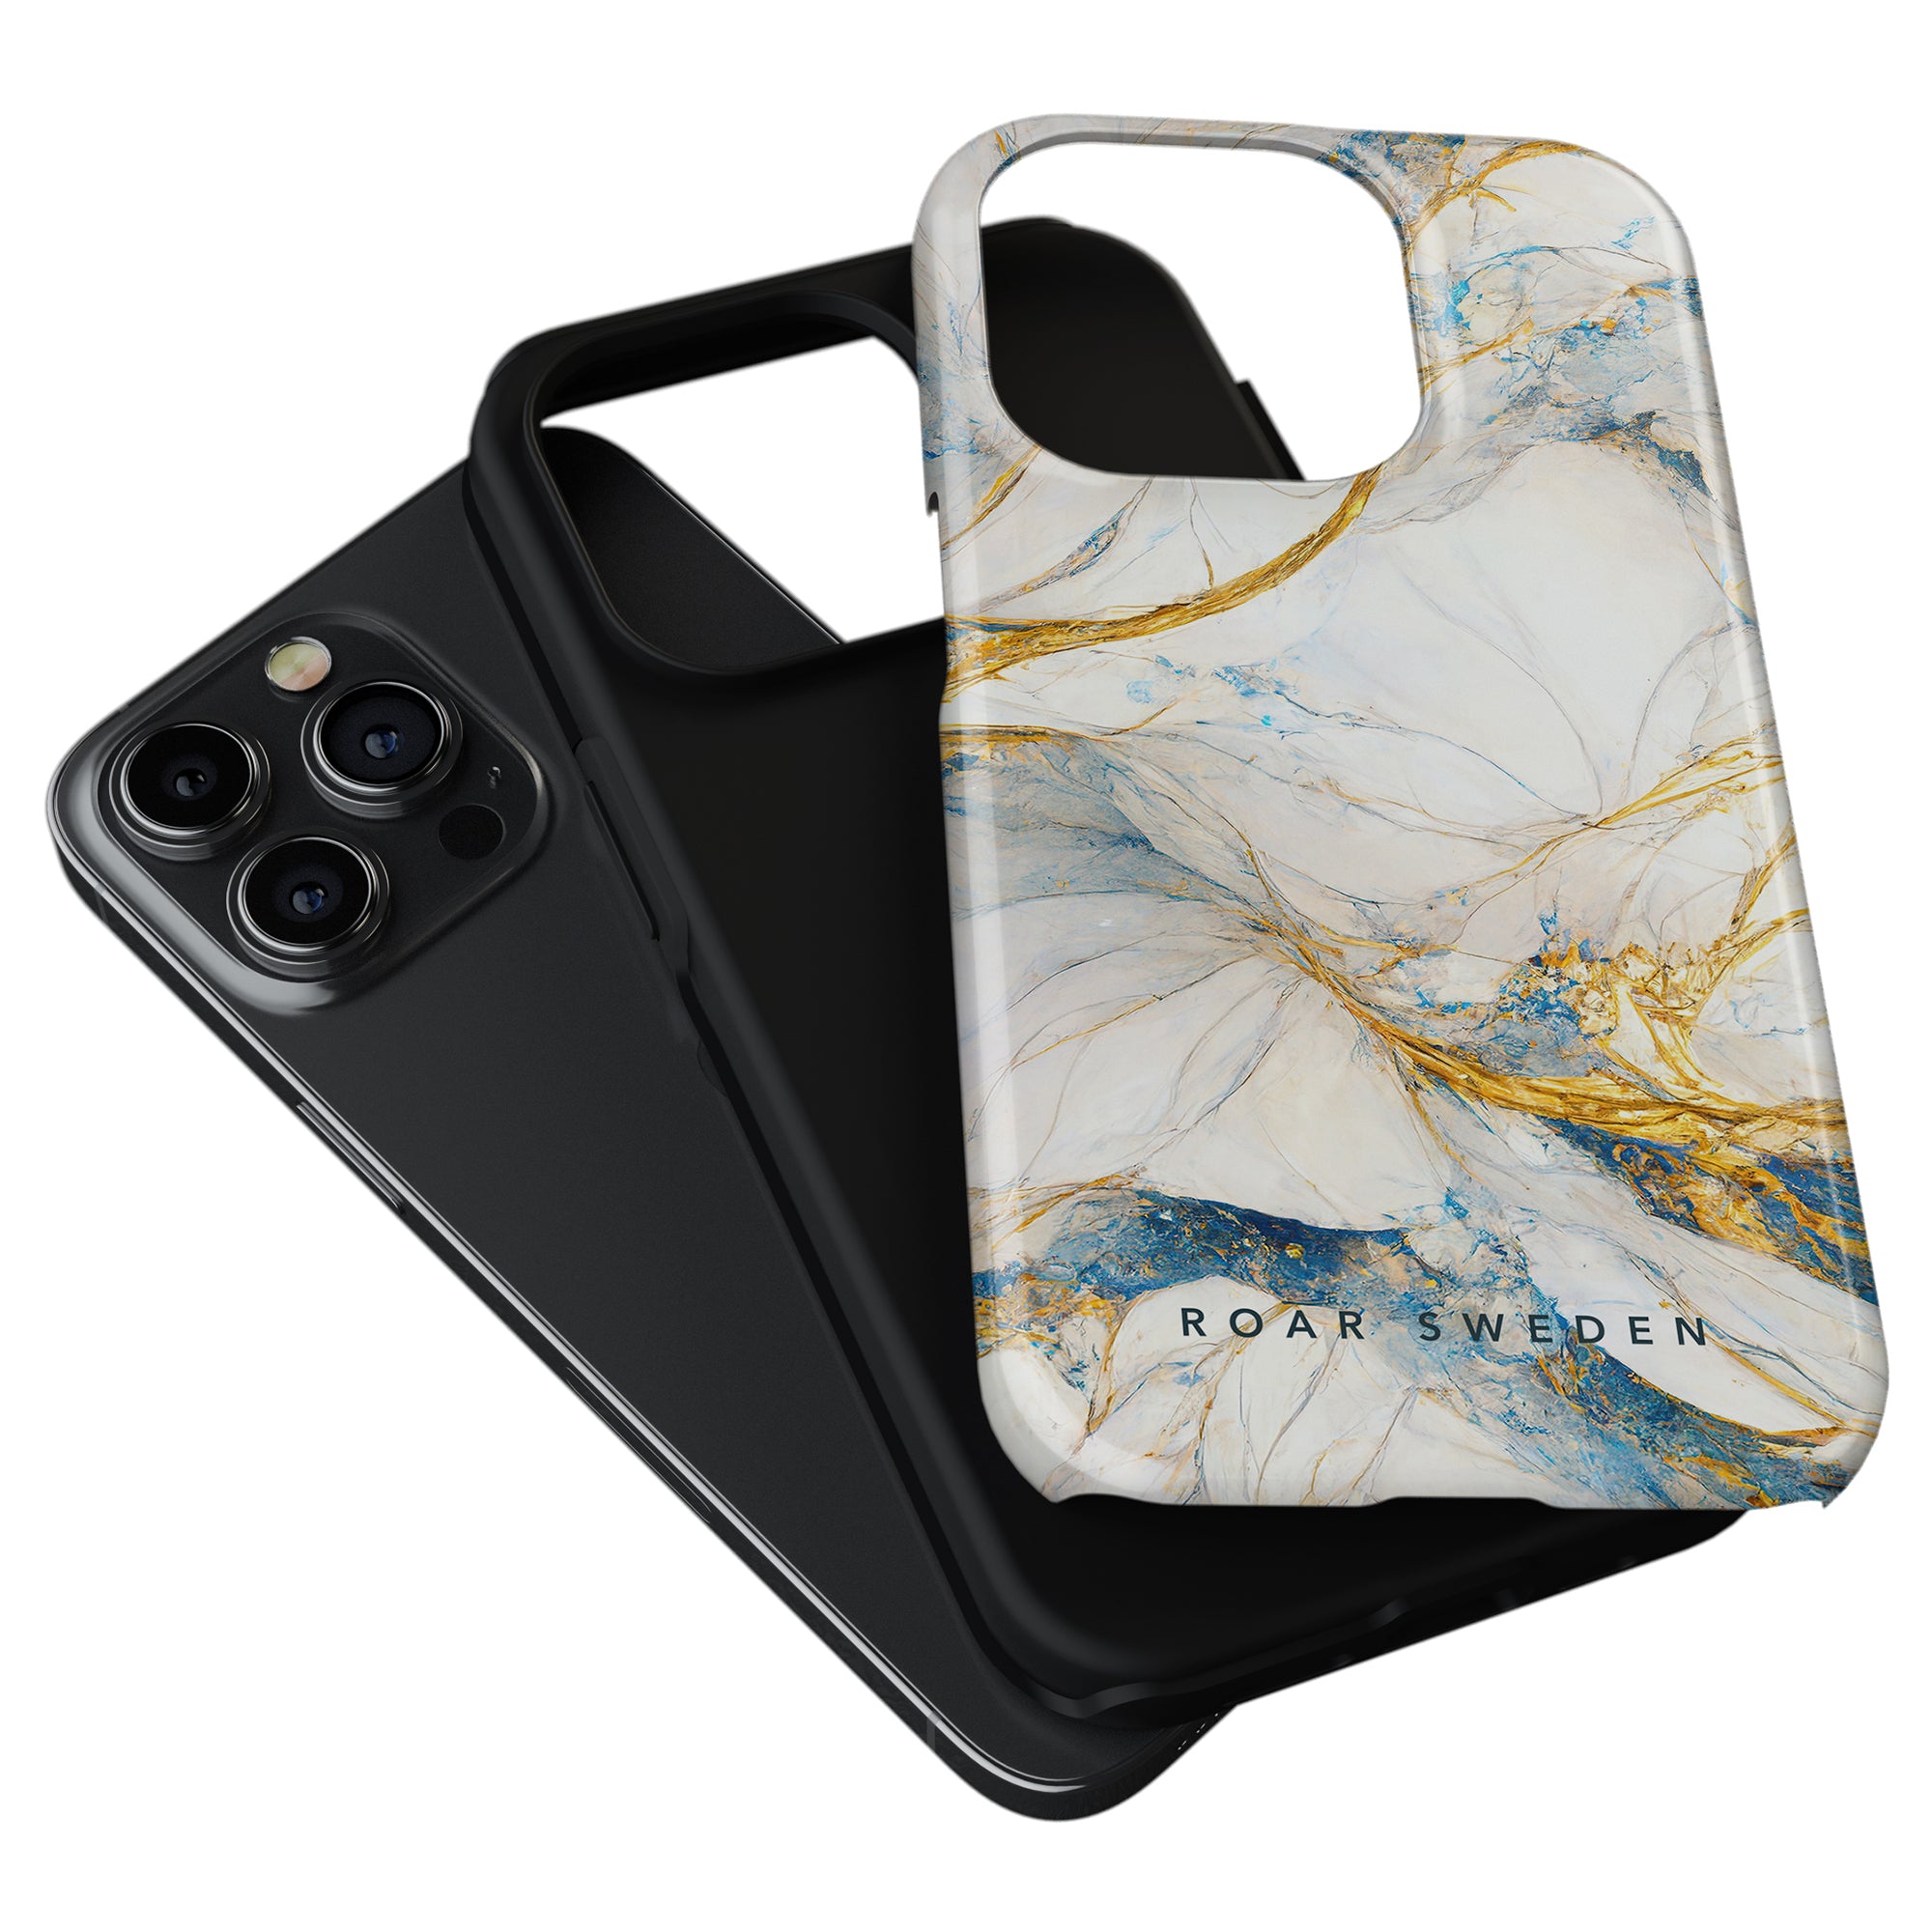 Two Queen Marble - Tough Cases; one black and another with a white marble design from the hybrid collection, featuring gold accents and text "roar sweden." Both are designed for models with triple cameras.